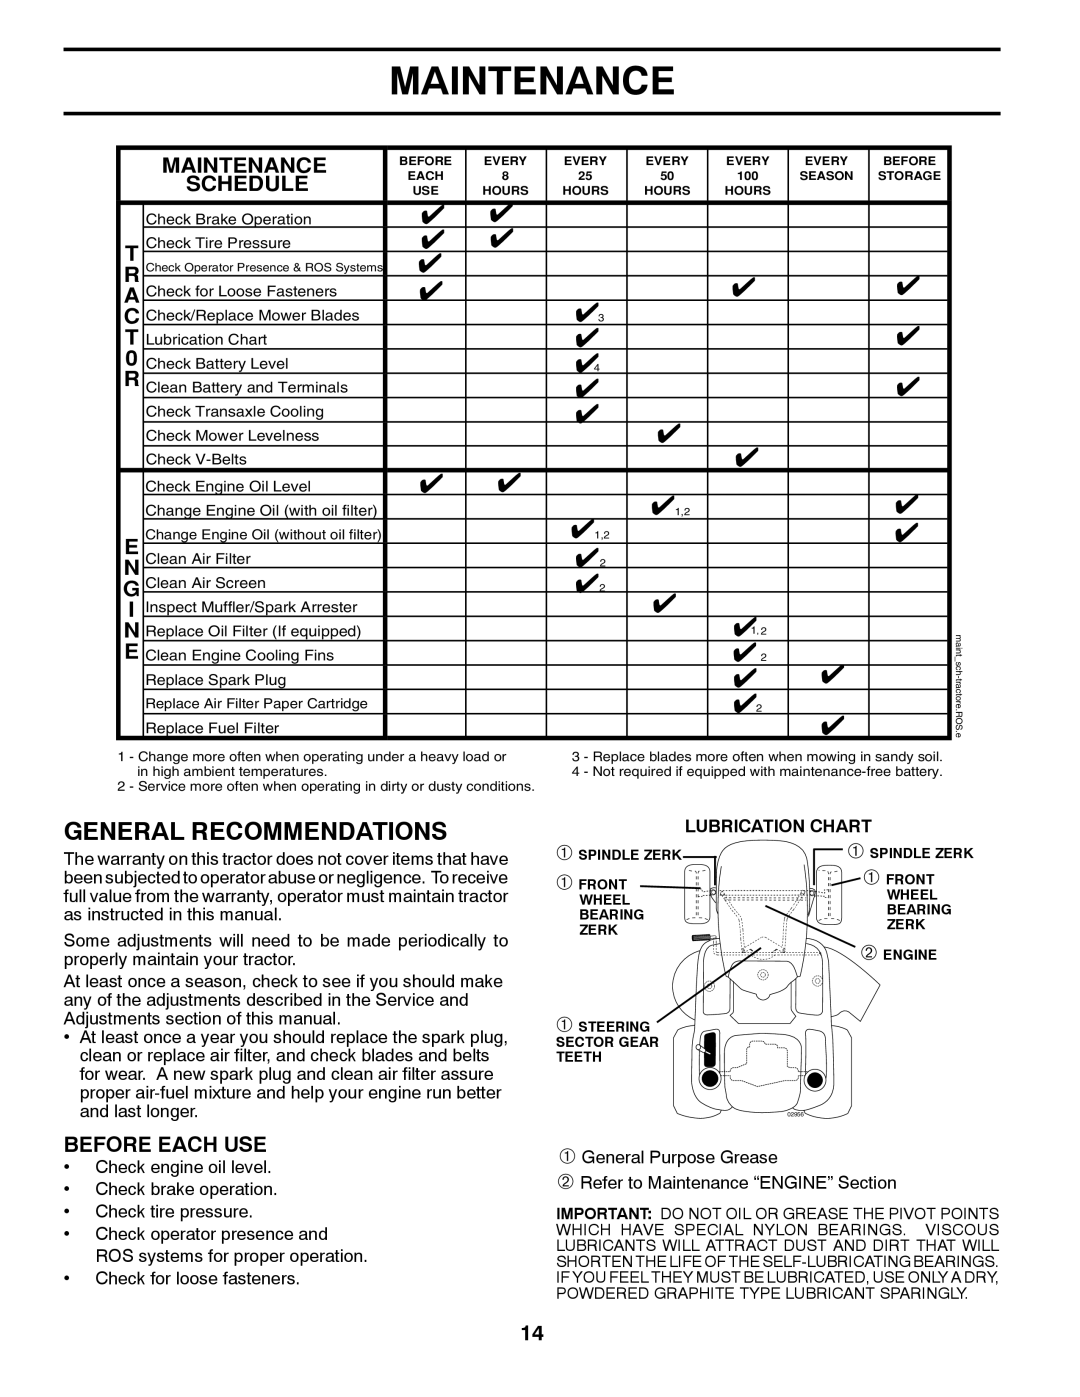 Poulan 412412 manual Maintenance, General Recommendations, Schedule, Before Each Use 